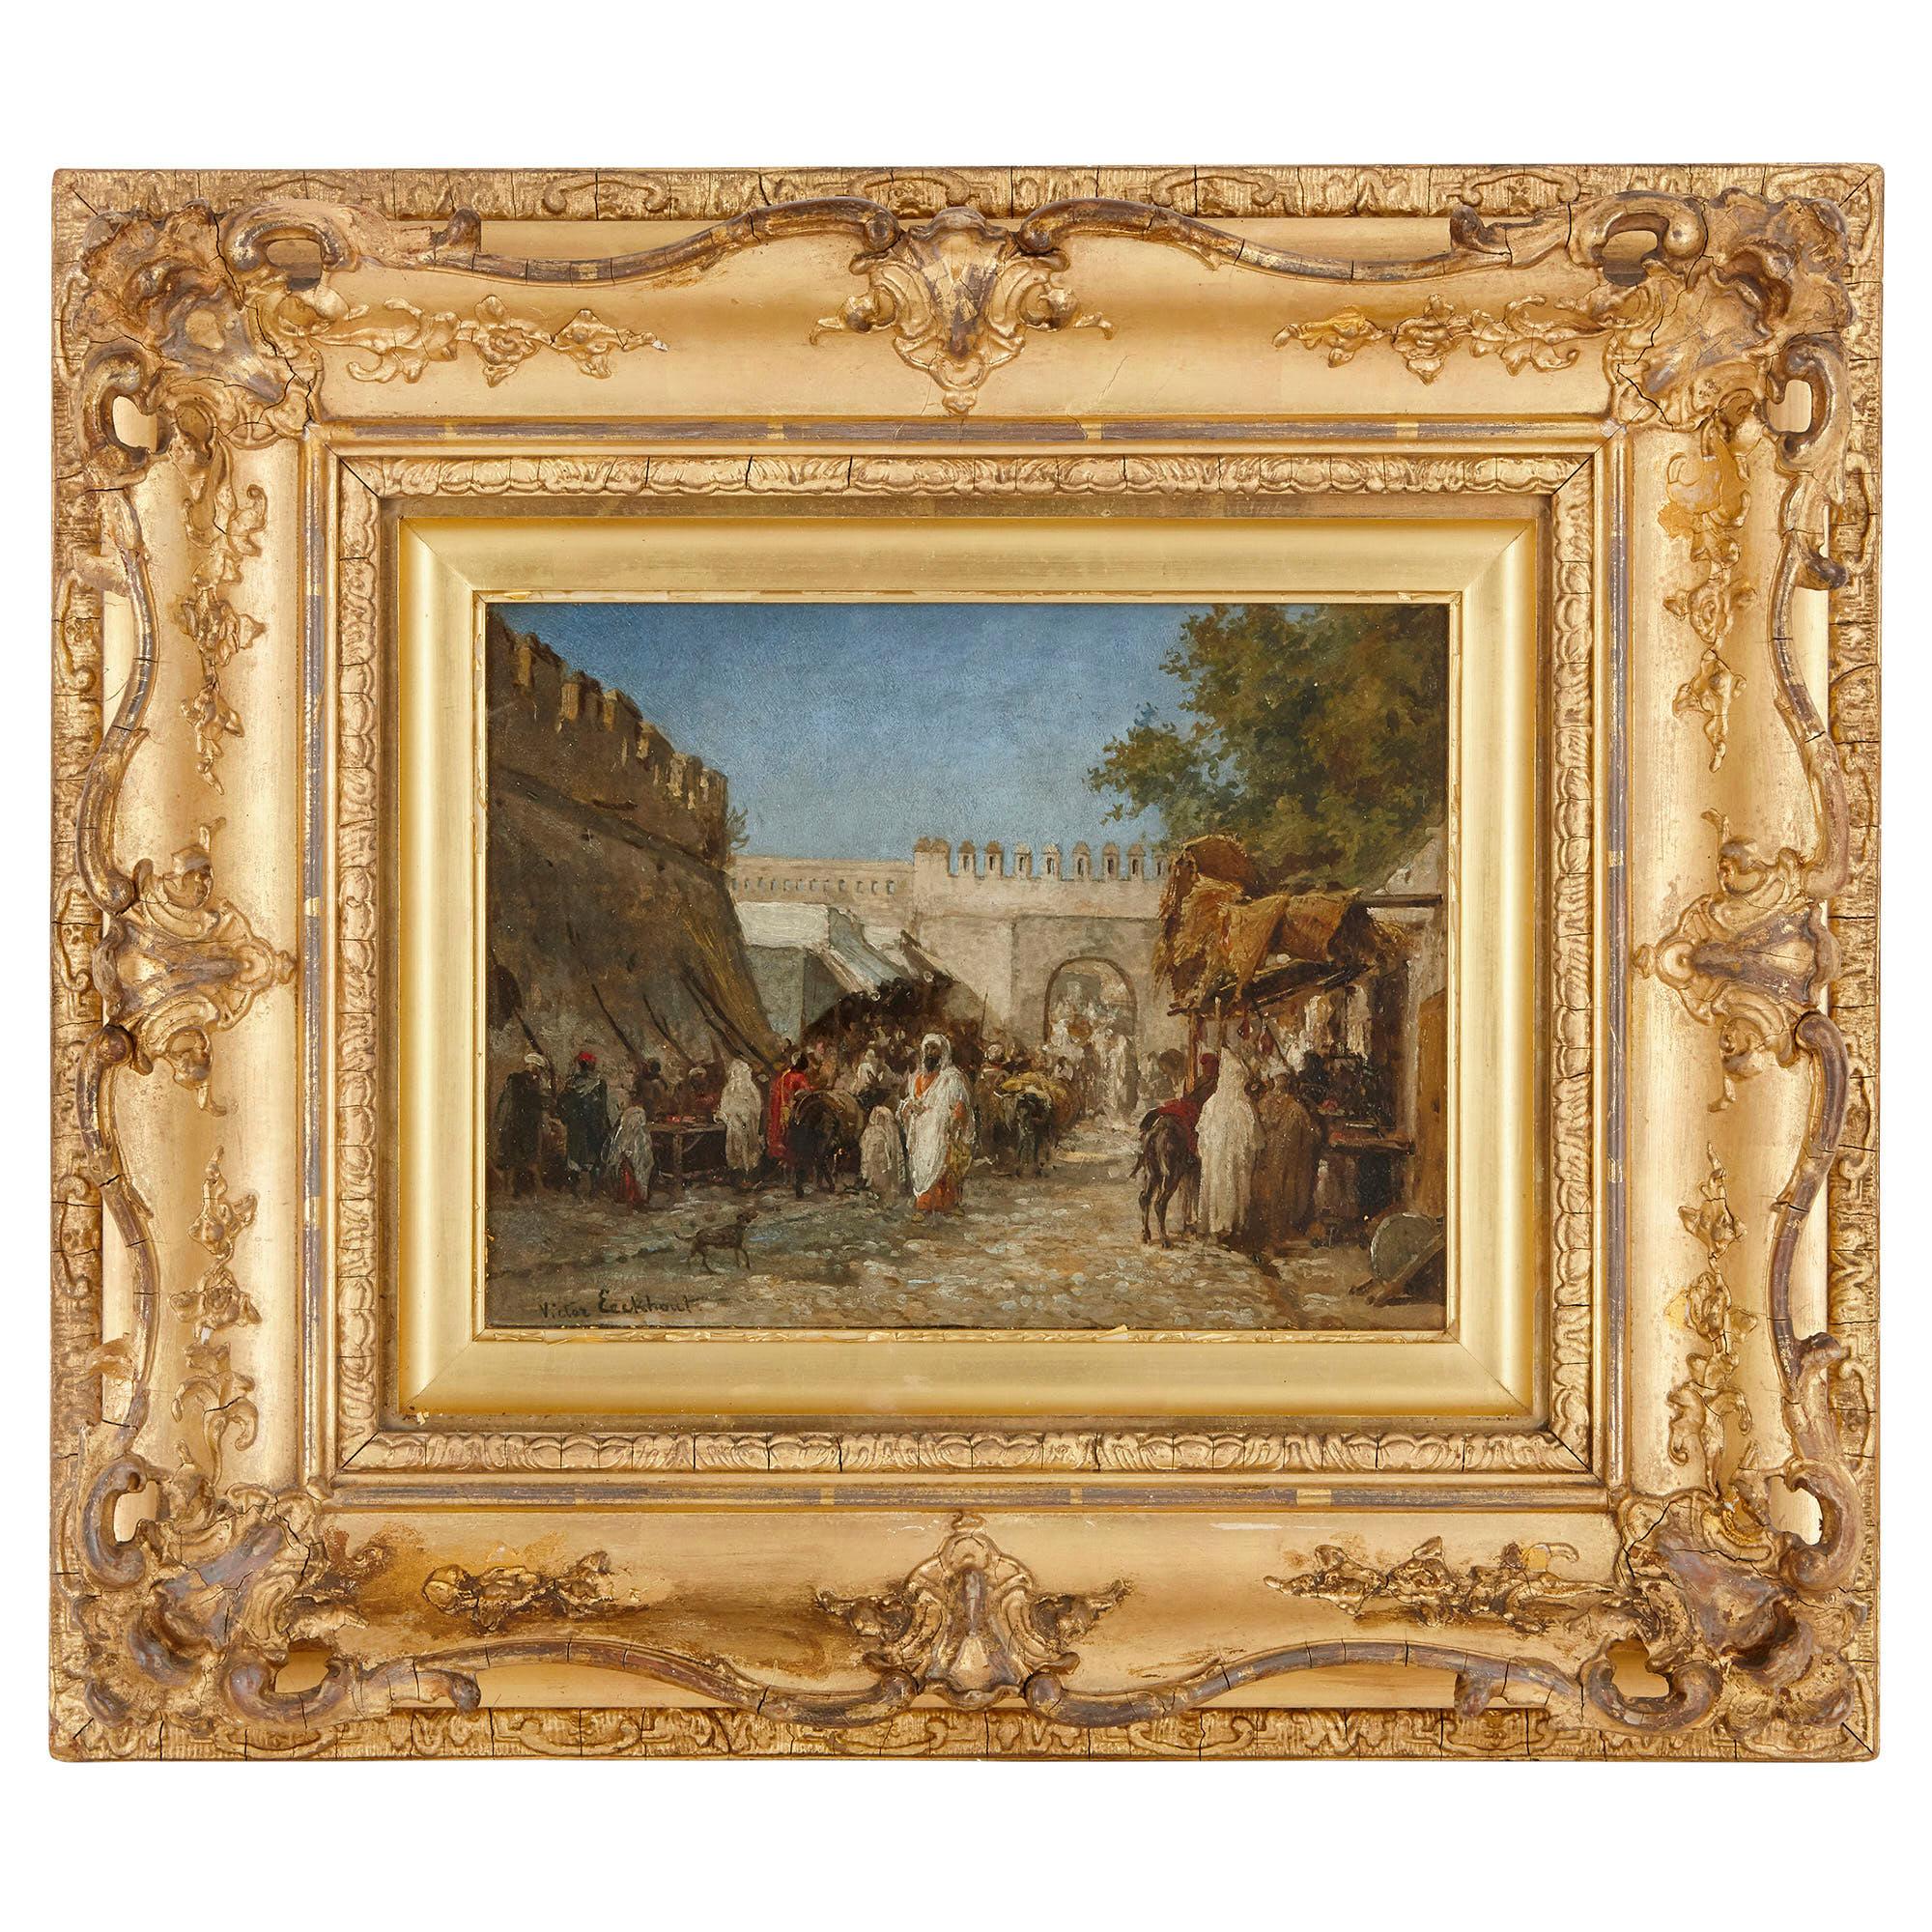 Victor Eeckhout Landscape Painting - Oil on panel painting of market in giltwood frame by Eeckhout 